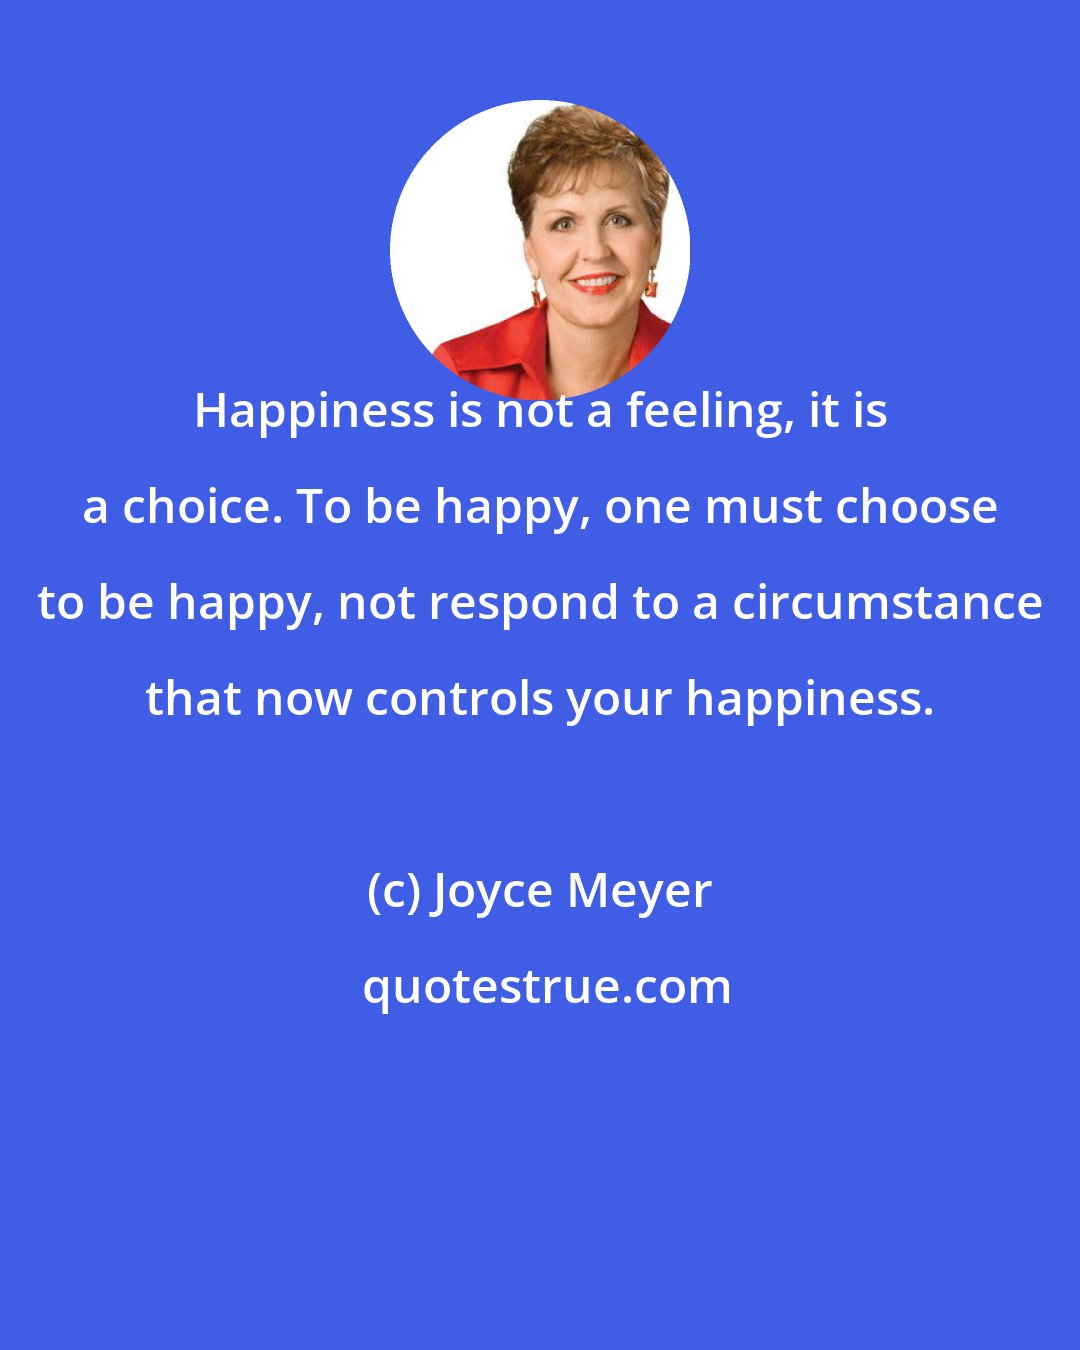 Joyce Meyer: Happiness is not a feeling, it is a choice. To be happy, one must choose to be happy, not respond to a circumstance that now controls your happiness.